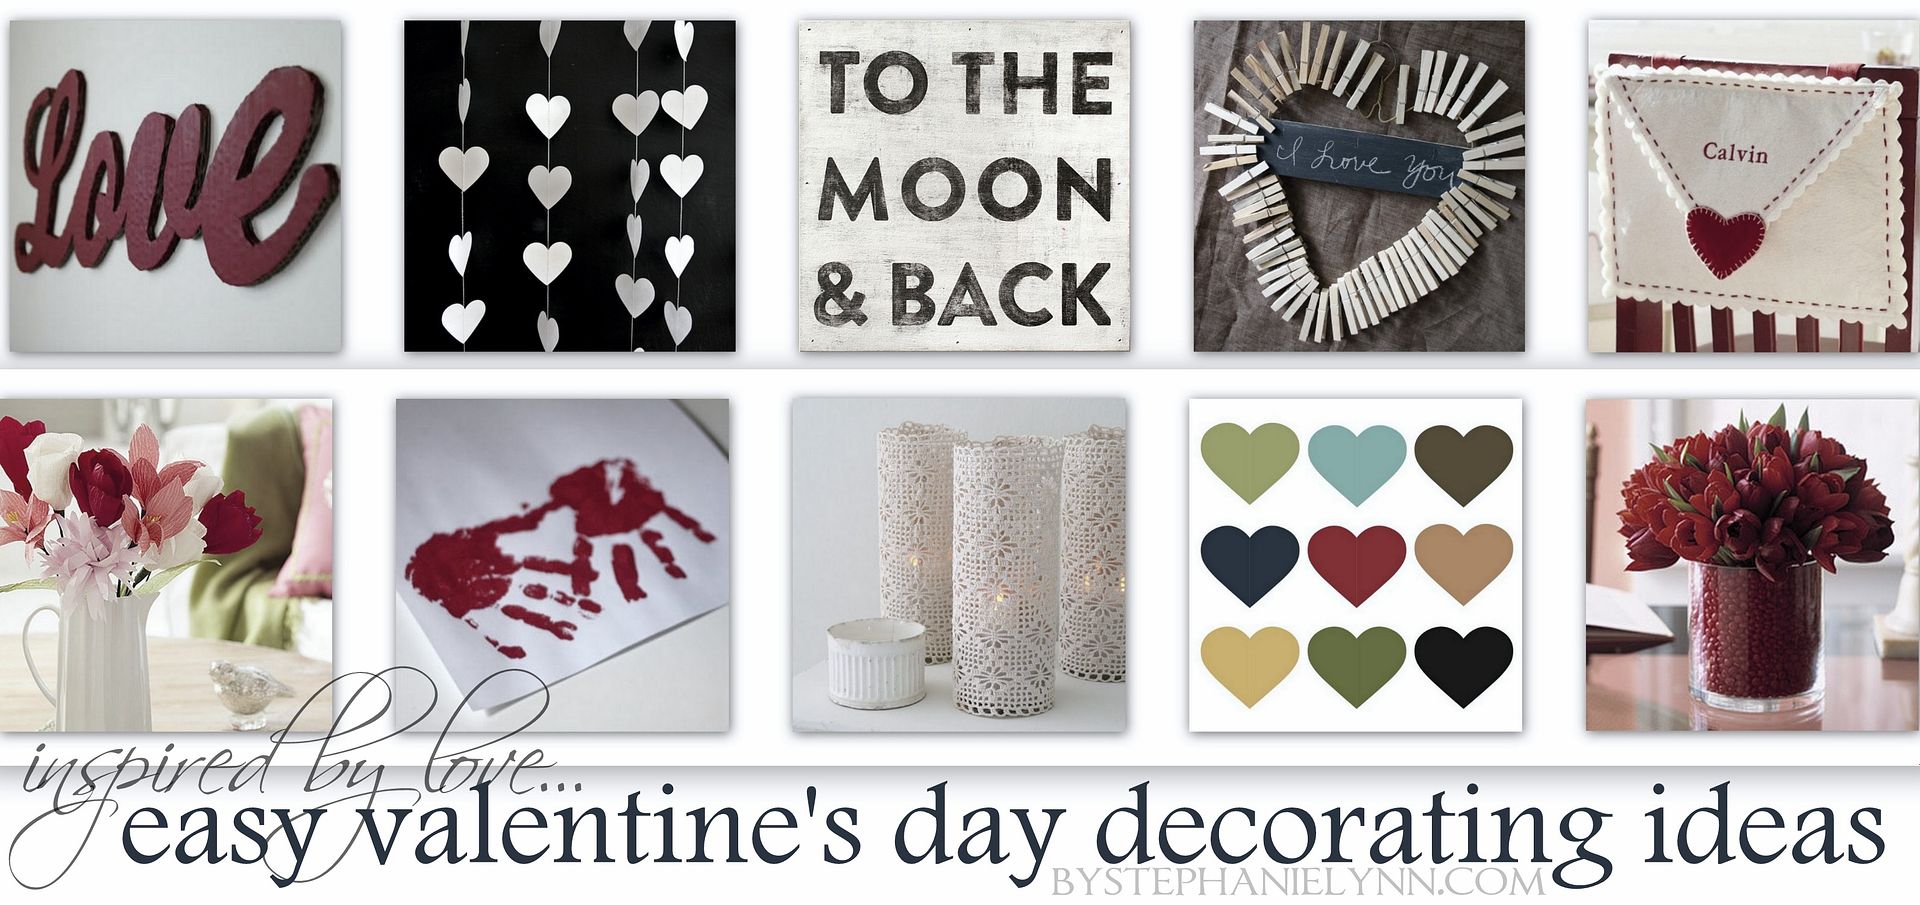 Easy Decorations for Valentine’s Day | Simple Ideas for Handmade Crafts & Decor